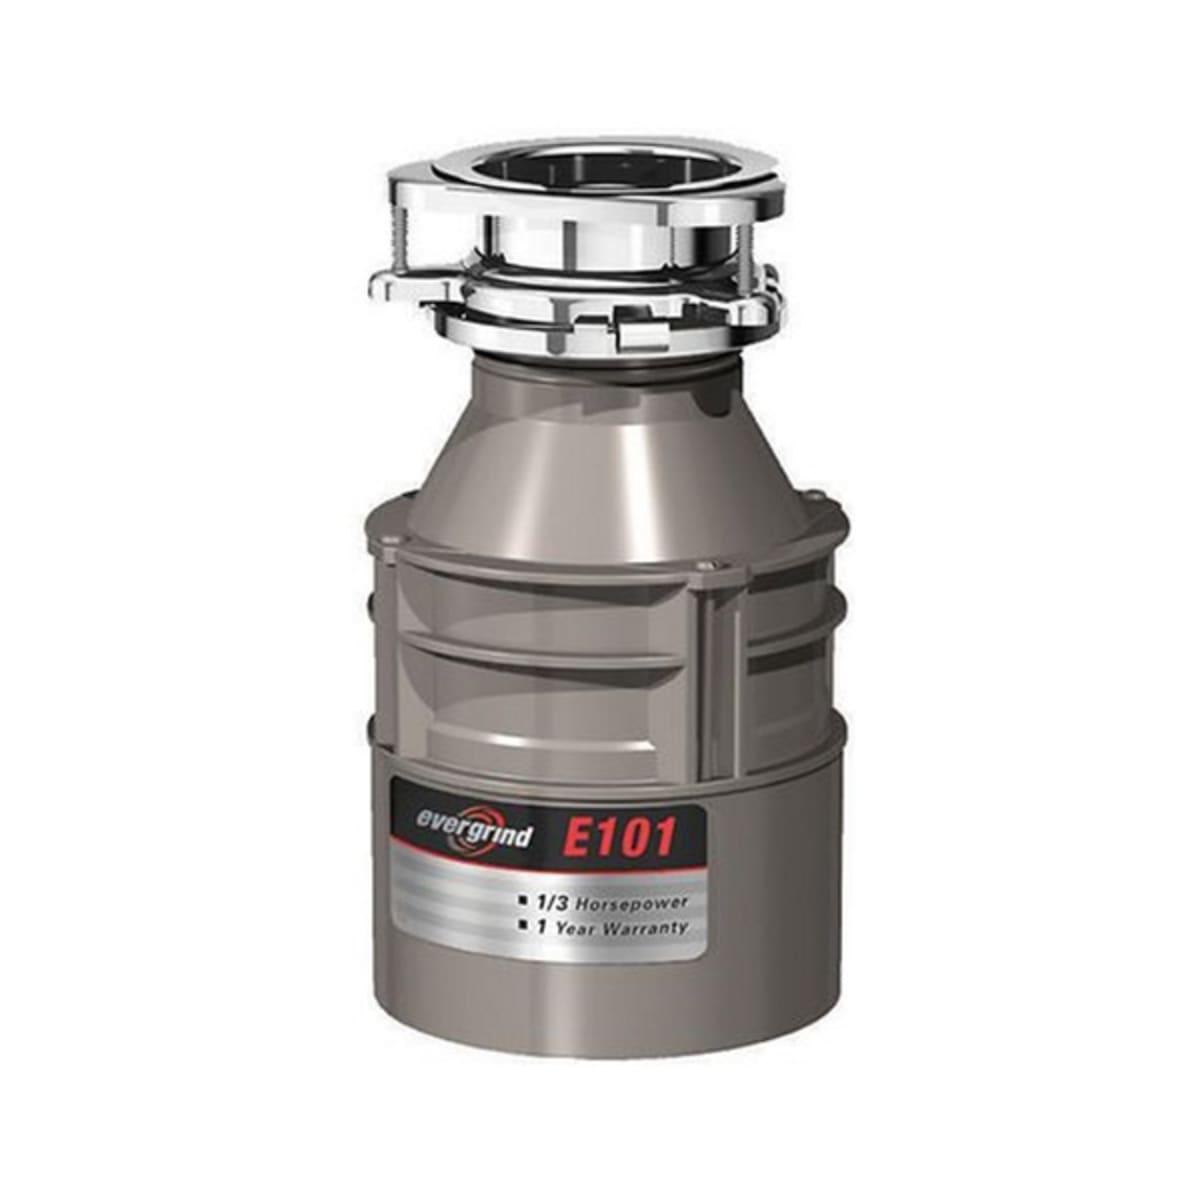 InSinkErator 75941A Evergrind E101 Garbage Disposal with